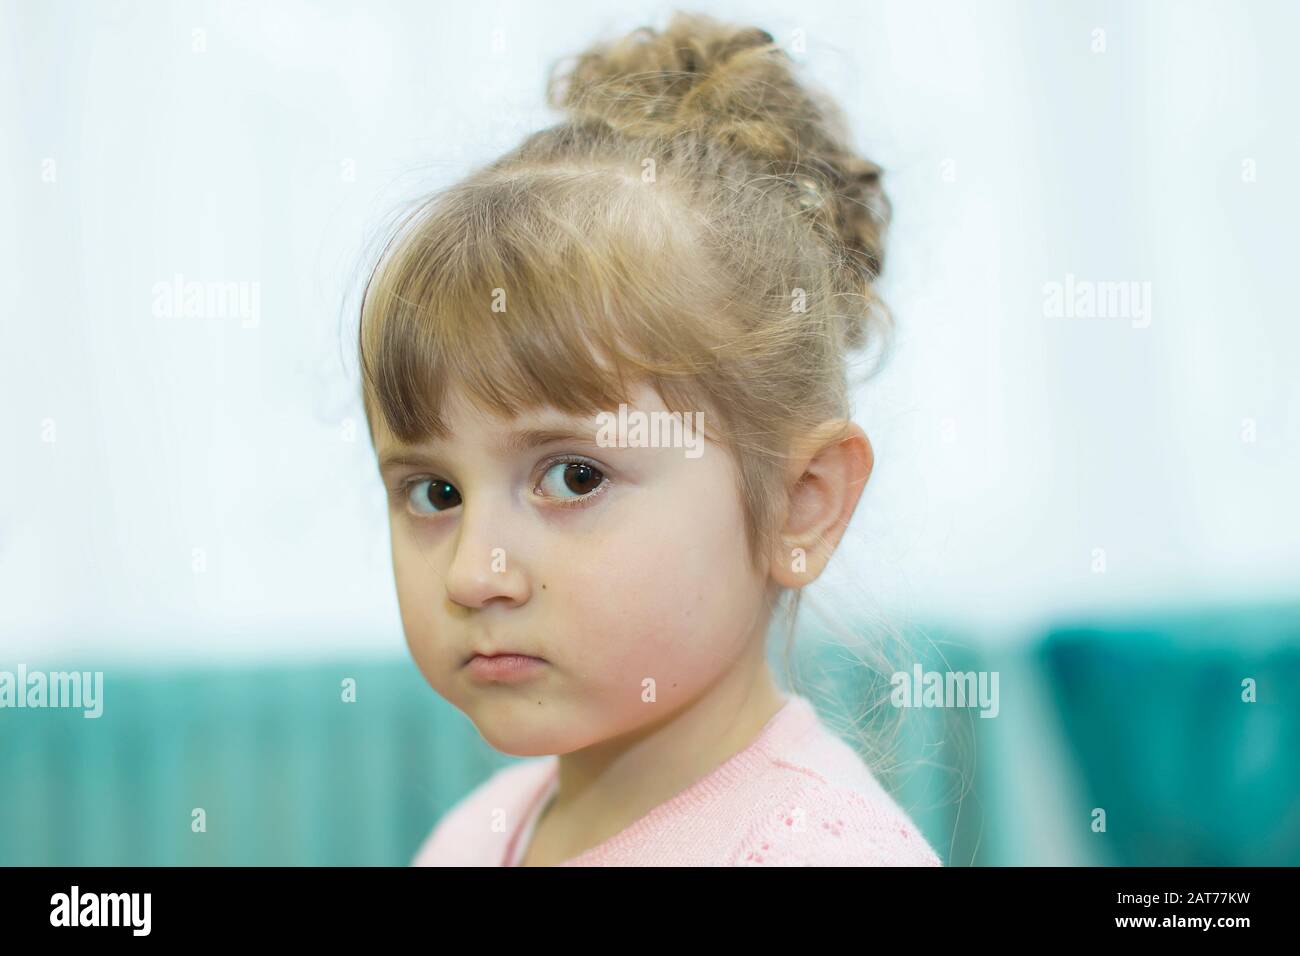 Morning party in kindergarten.The face of a serious three year old girl. Stock Photo